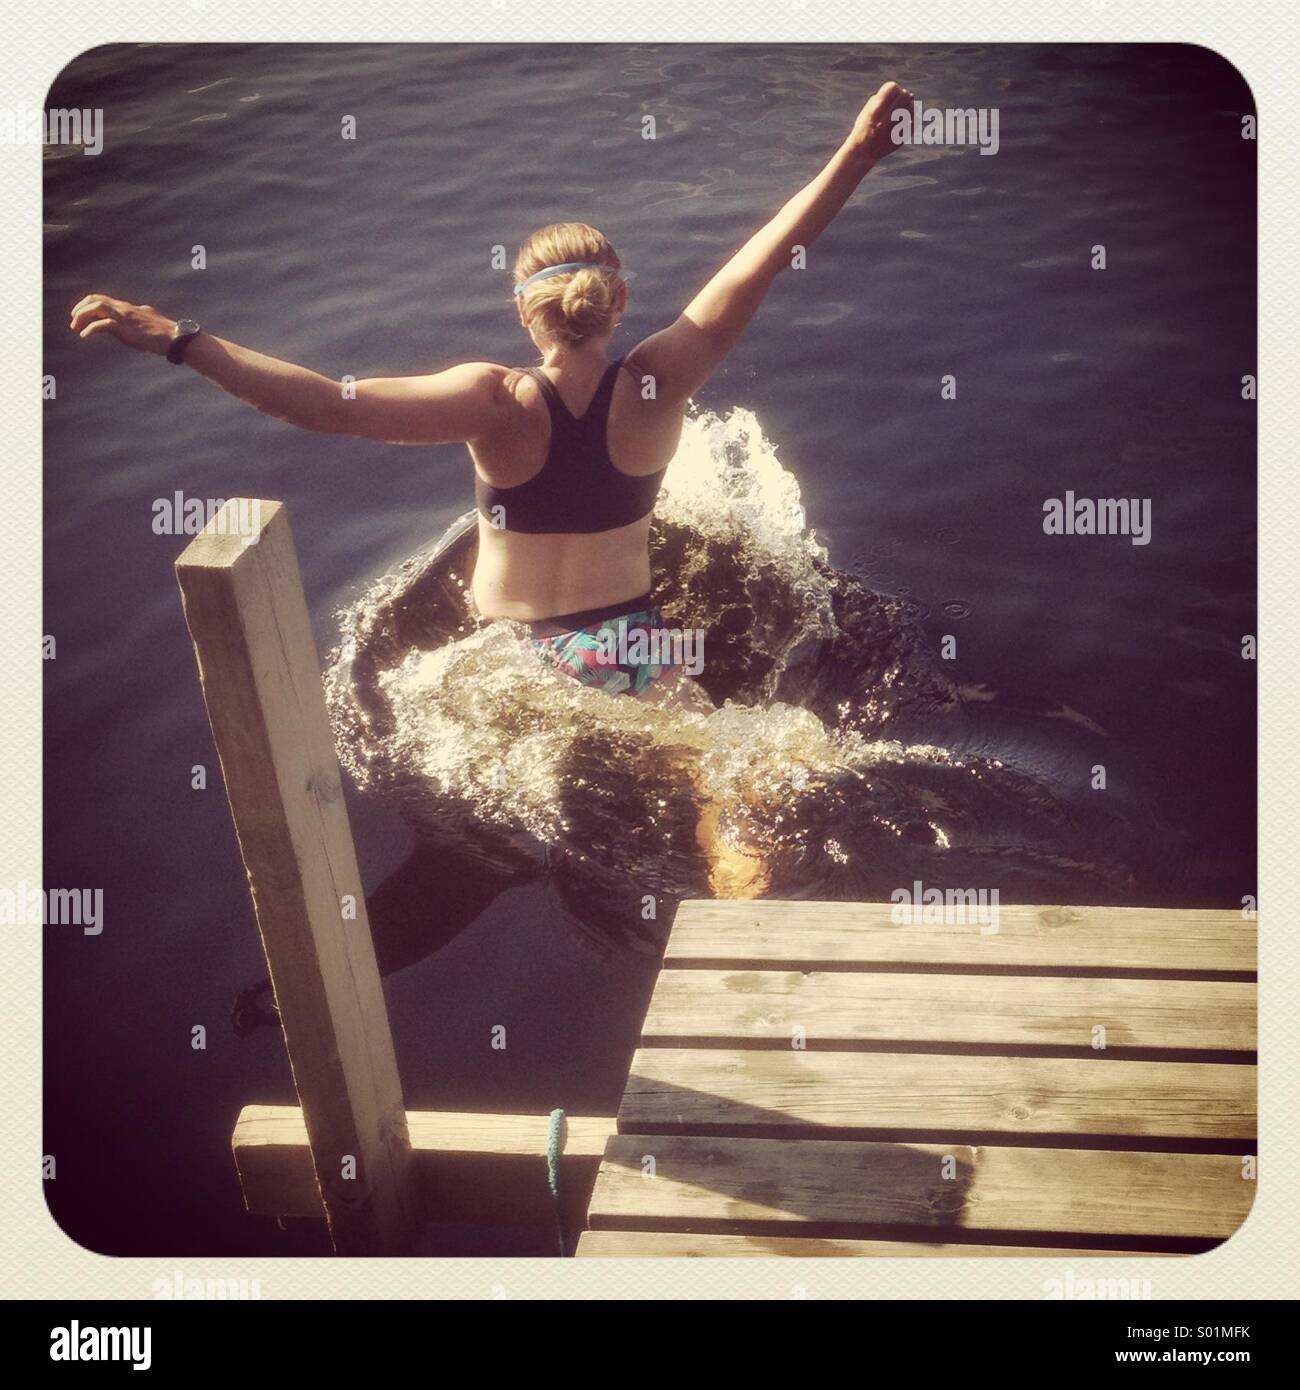 A woman jumping off a pier into a lake Stock Photo